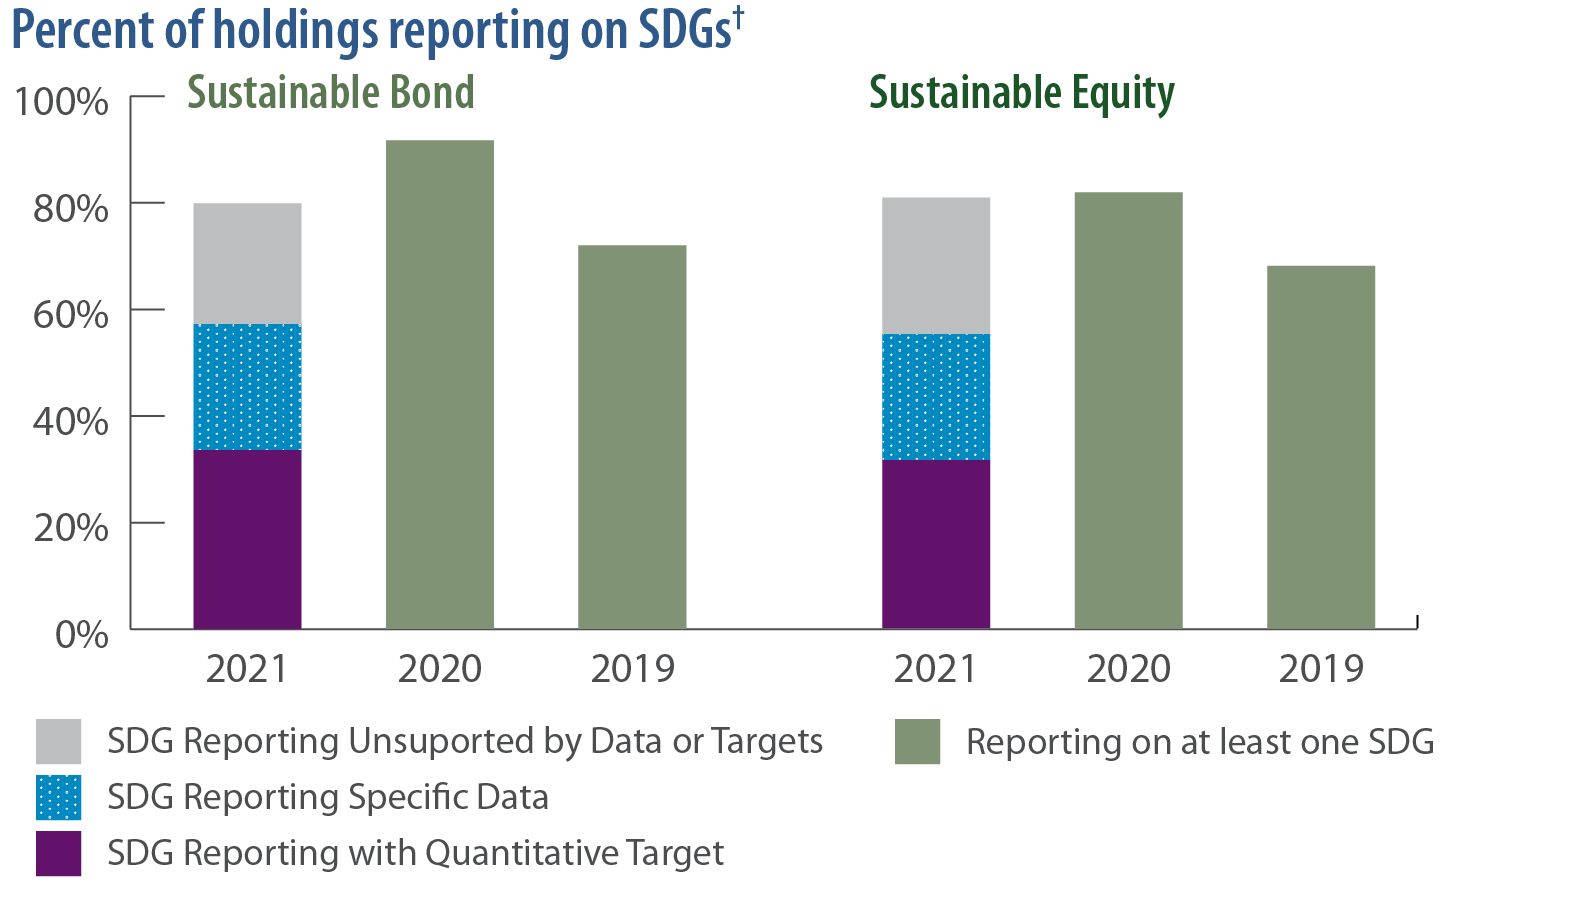 Percent of holdings reporting on SDGs